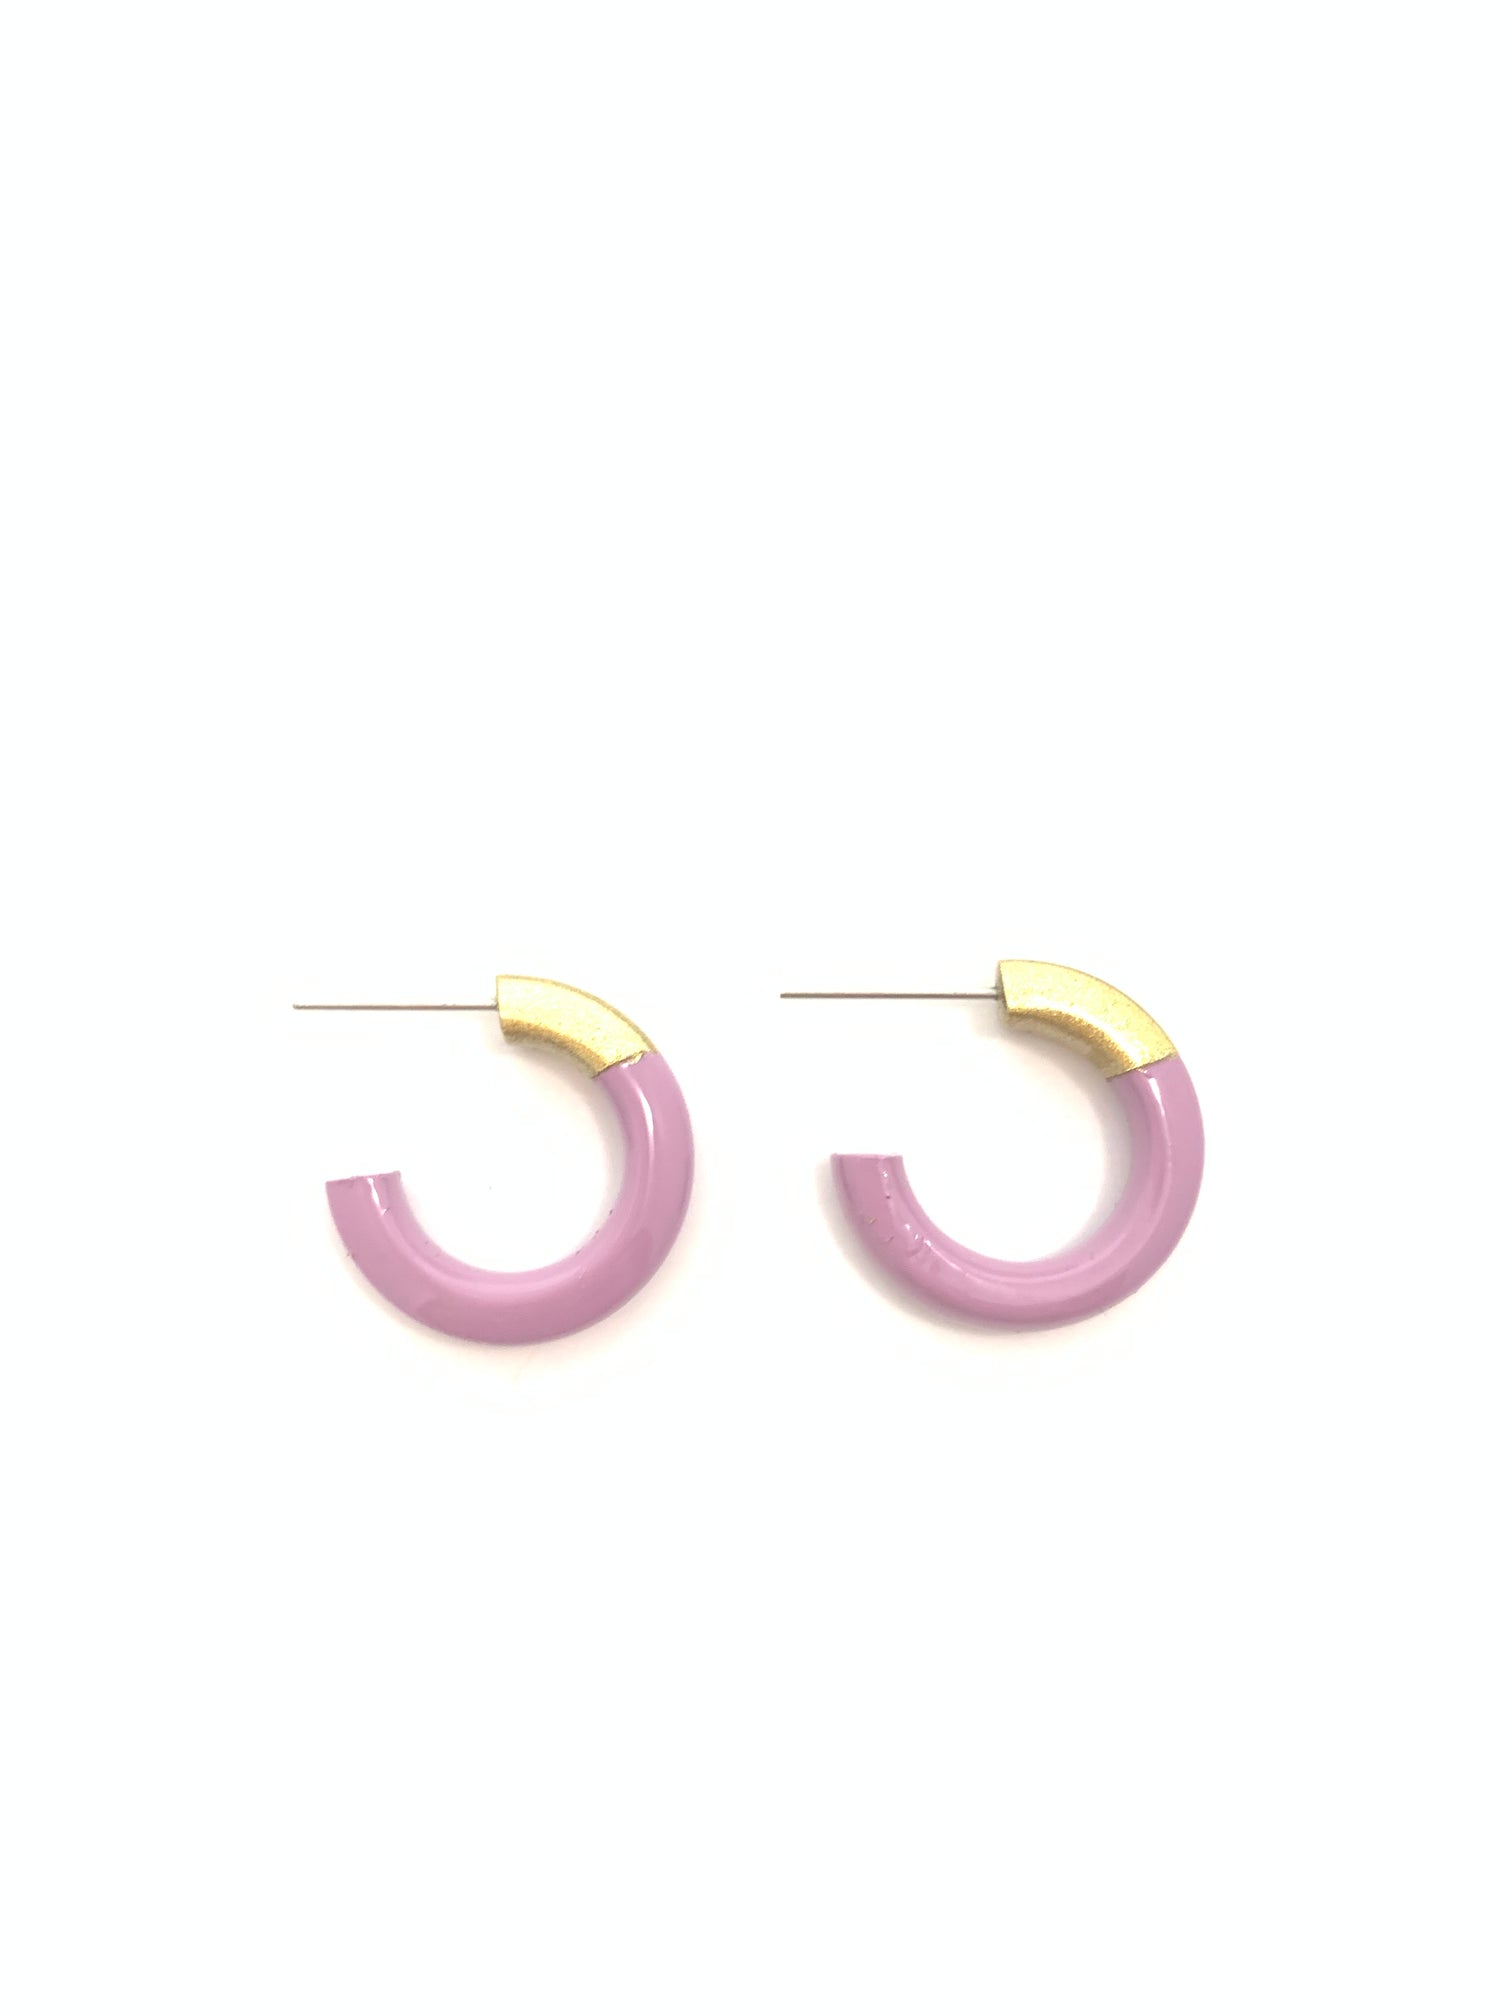 Liz Small Hoops in Lilac